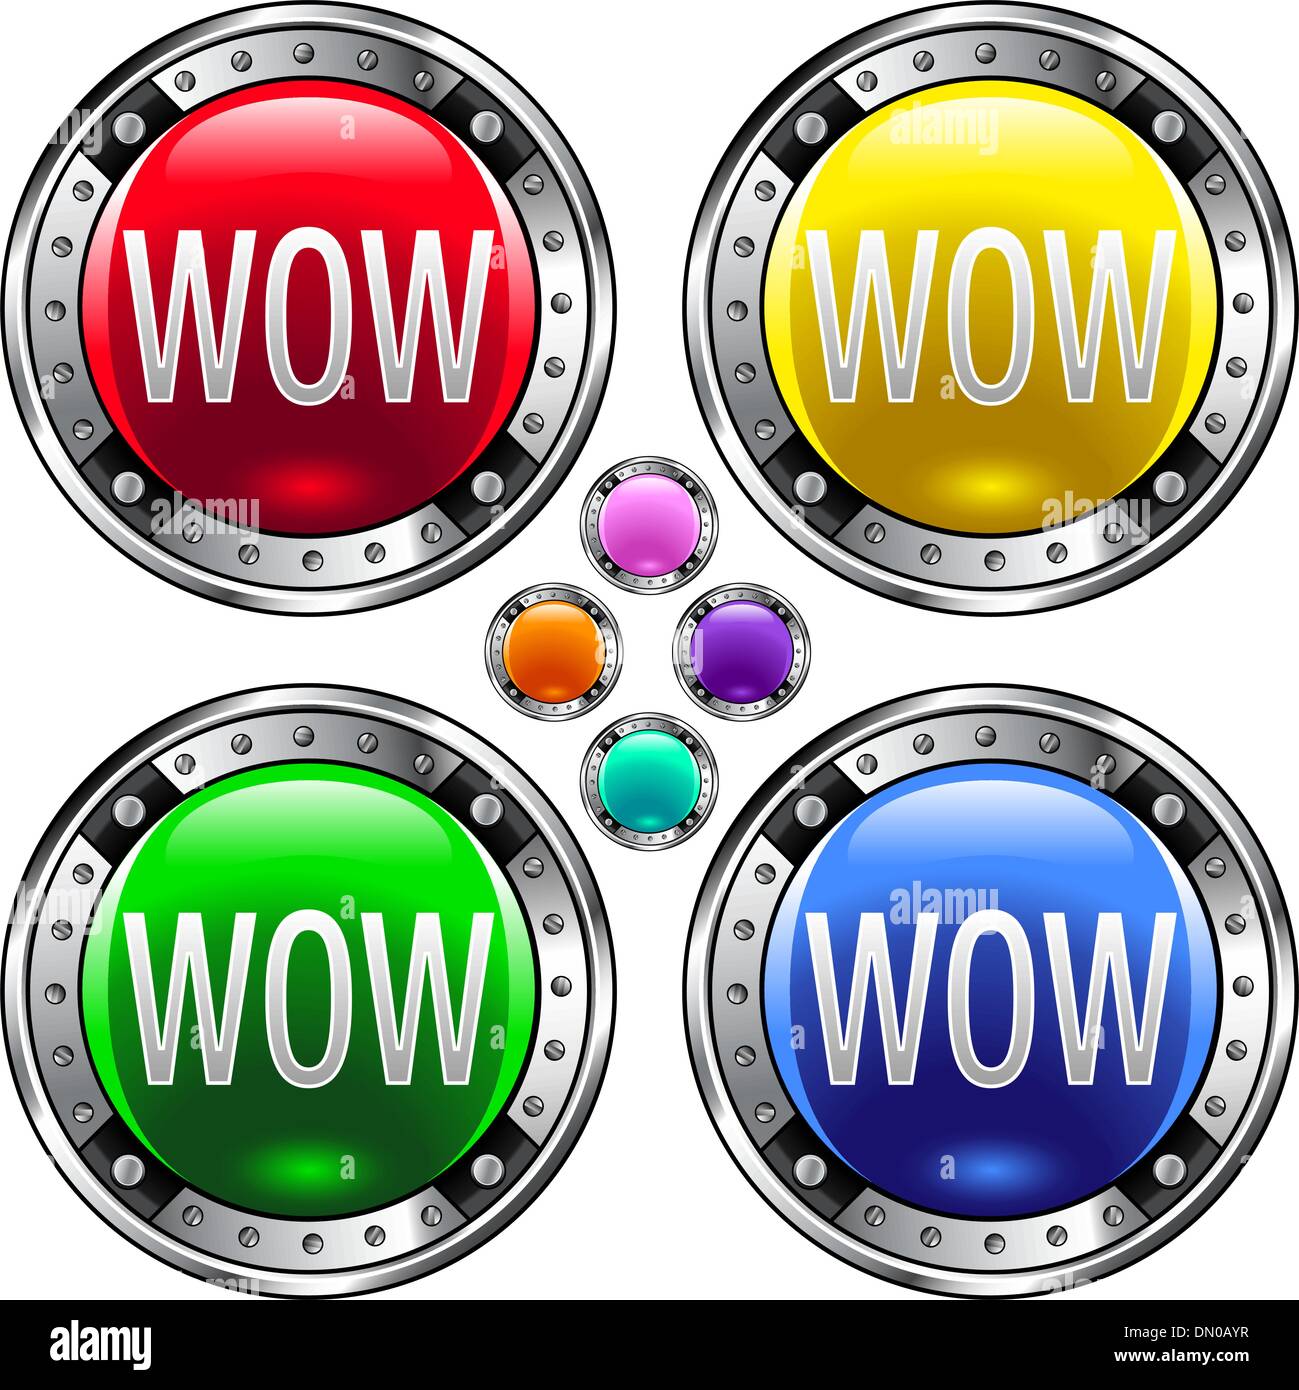 Wow colorful button Stock Vector